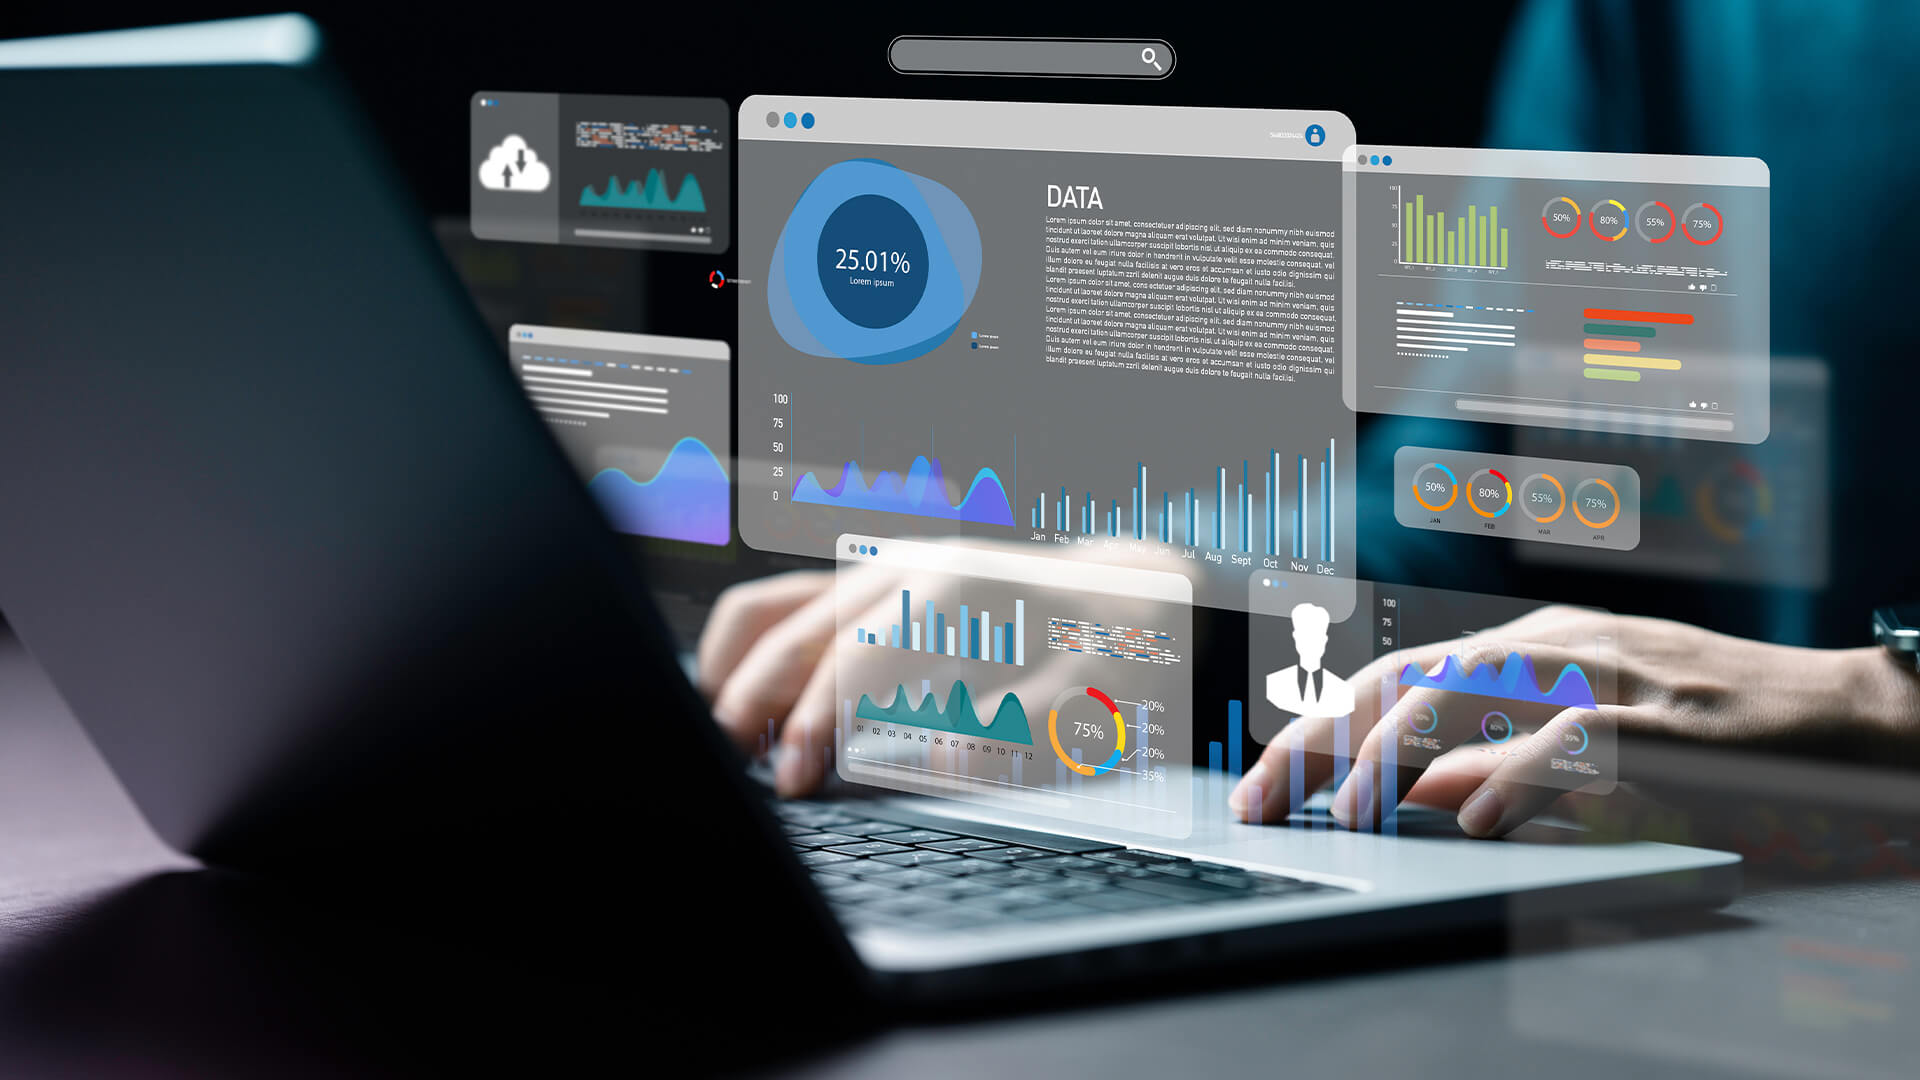 An analyst uses a computer and dashboard for data business analysis and Data Management System with KPI and metrics connected to the database for technology finance